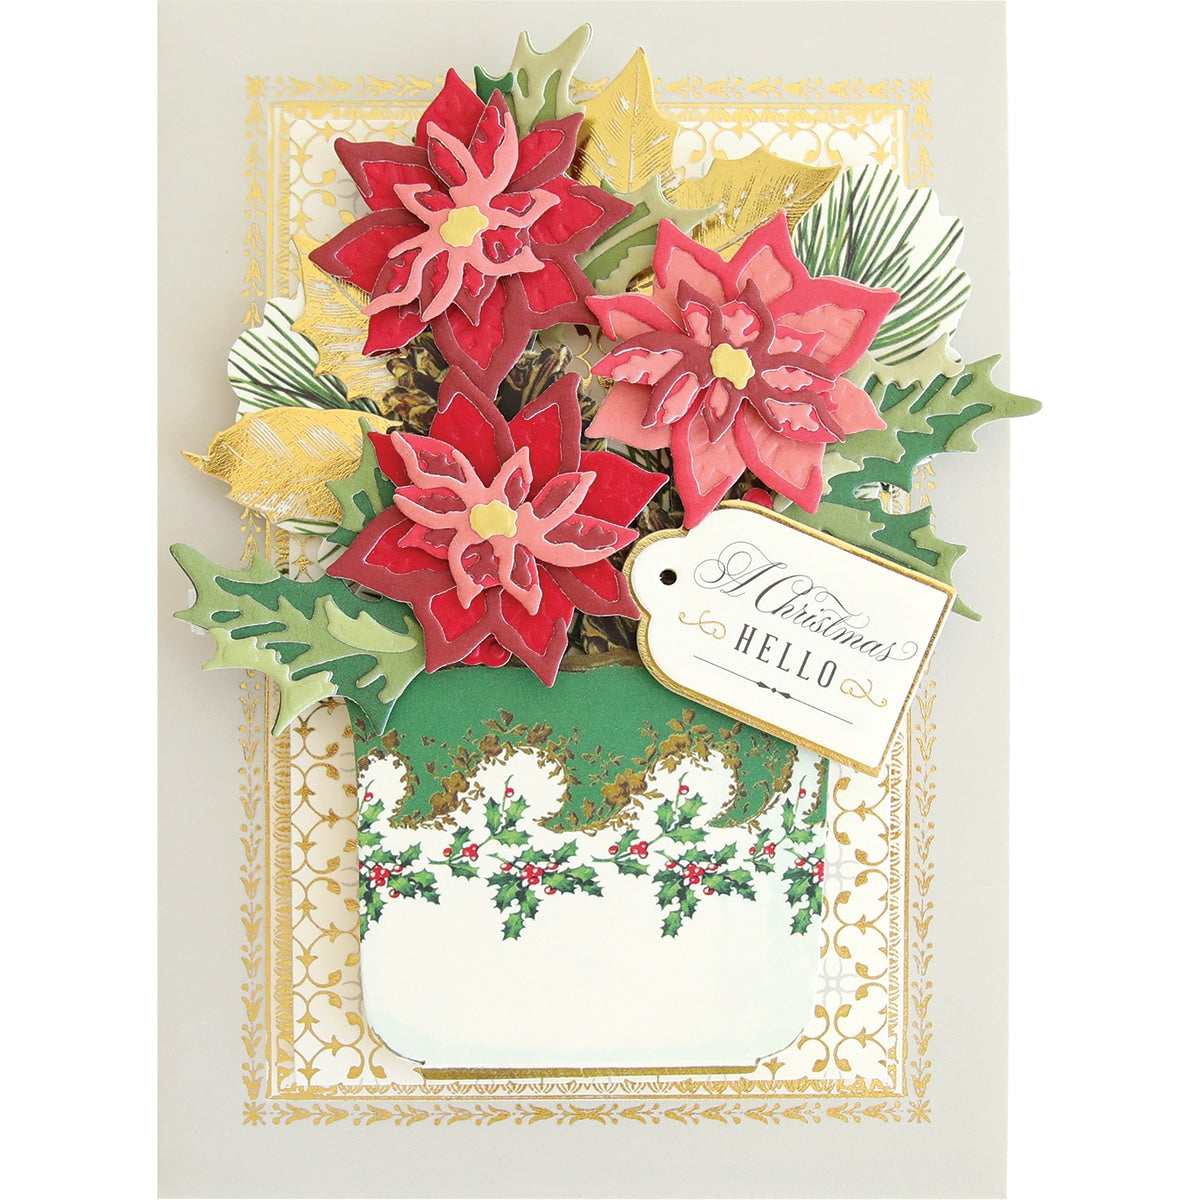 a christmas card with poinsettis and holly.